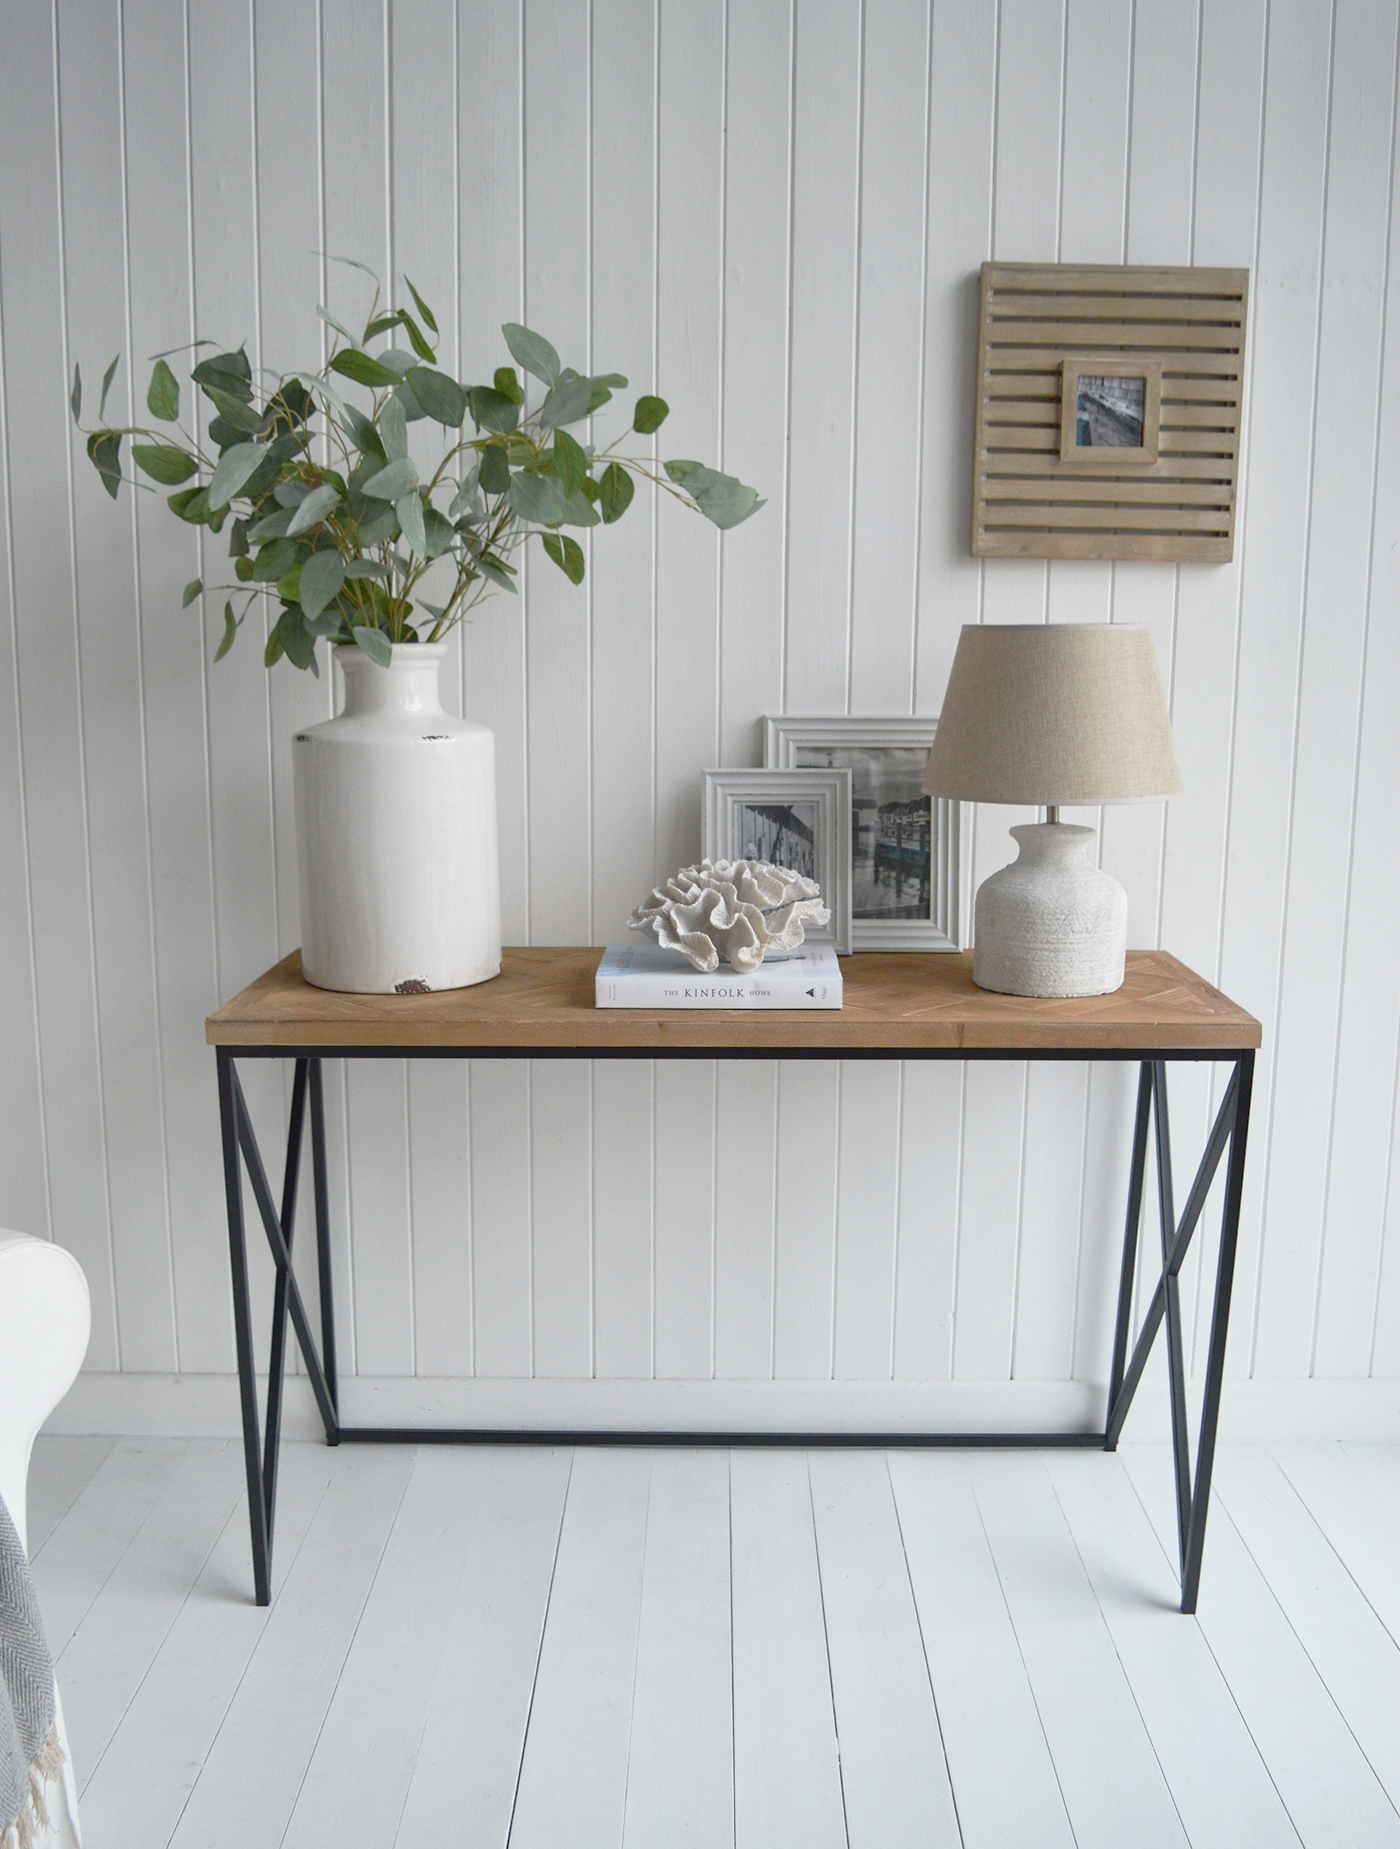 Stockbridge Parquet console Table - New England Modern Country and Farmhouse Furniture and Interiors